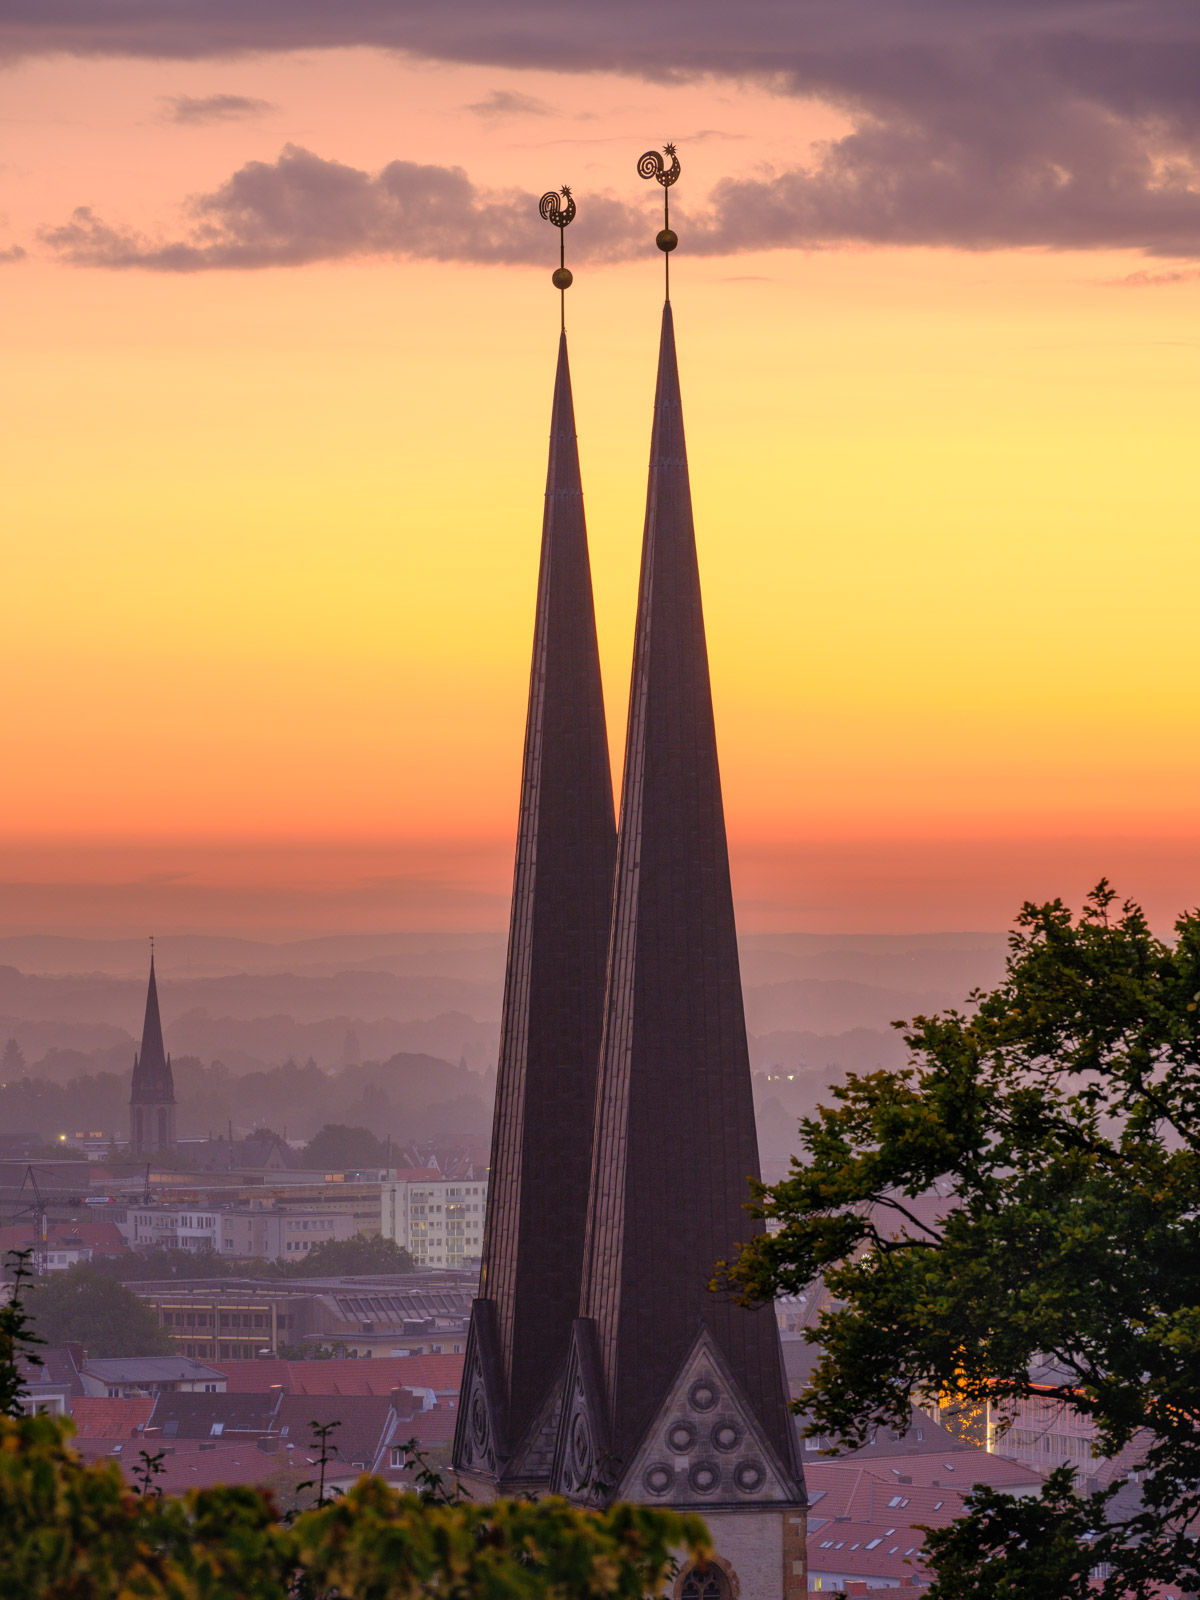 Towers of the 'Marienkirche'. Dawn over Bielefeld city center in September 2021 (Germany).